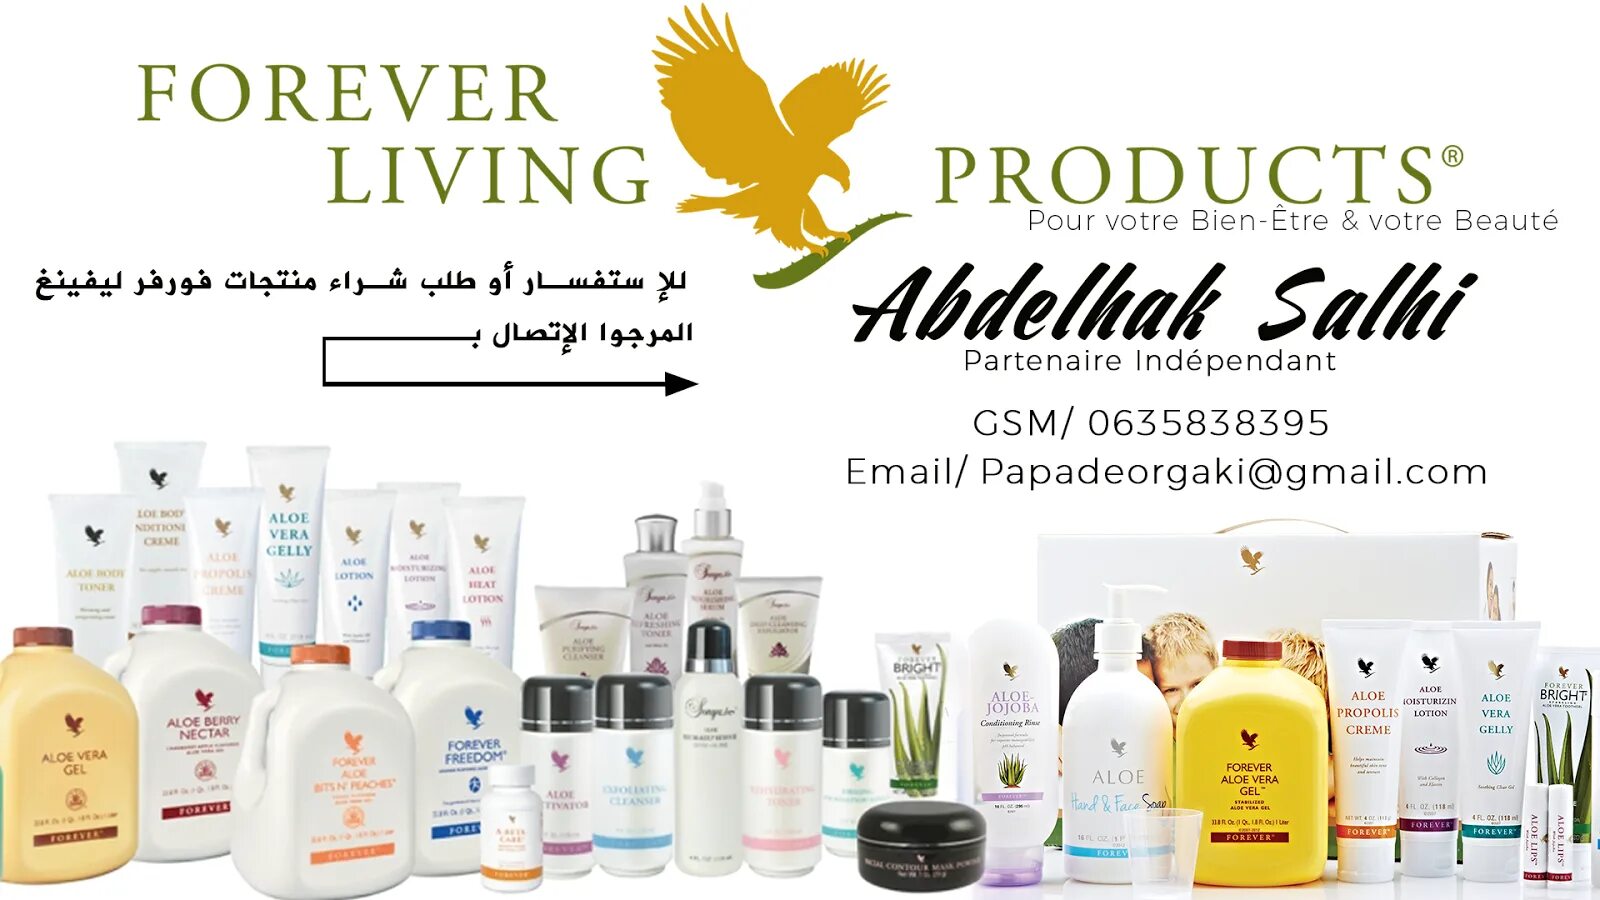 Forever Living products. Картинки Forever Living products. Форевер компании косметика.